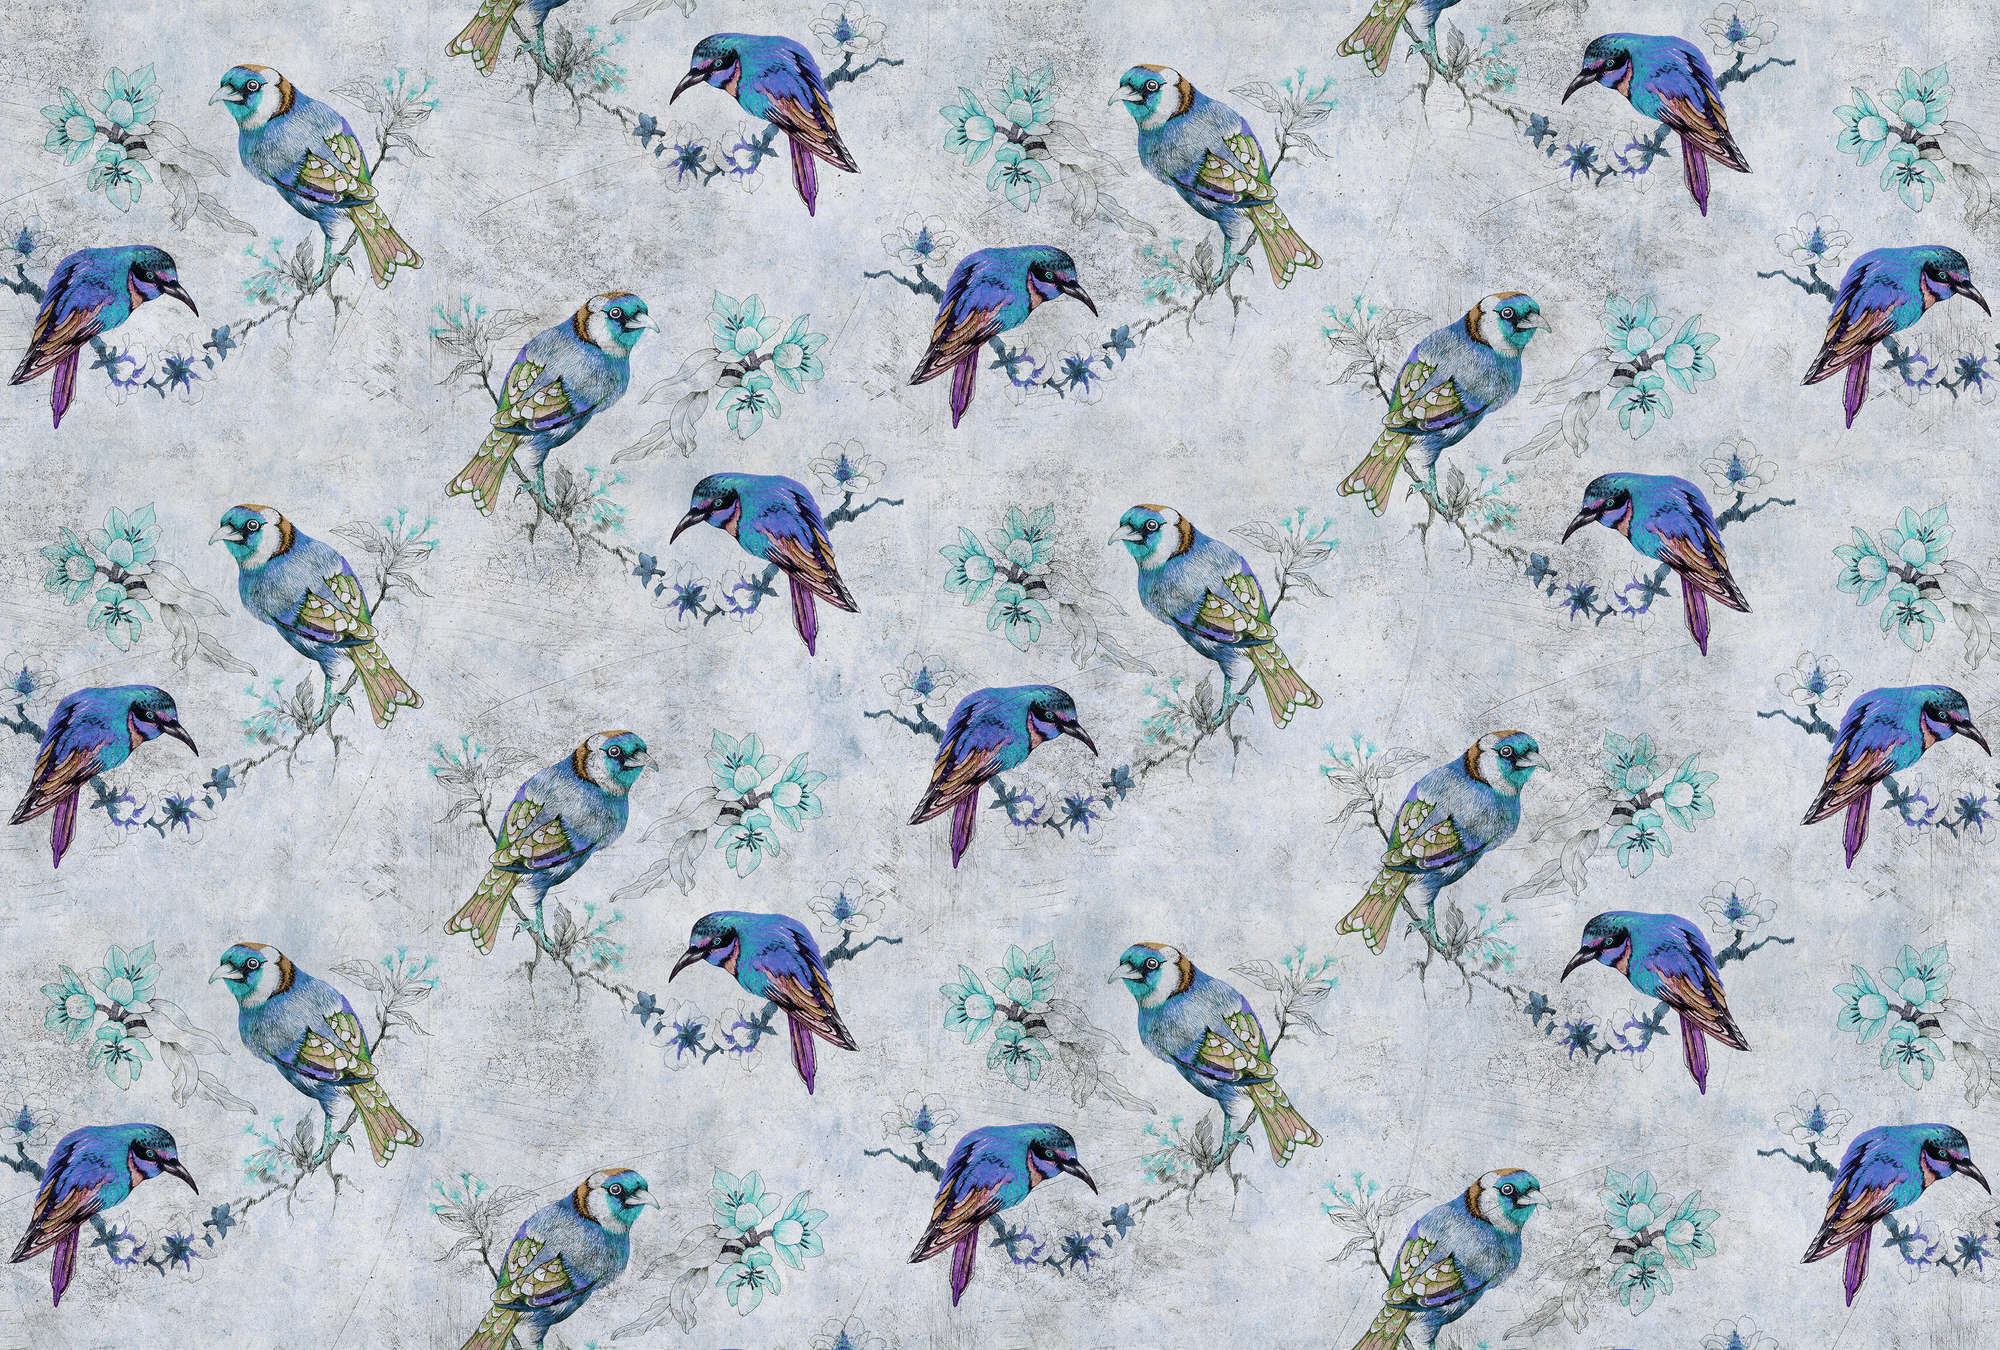             Love birds 1 - Photo wallpaper bird pattern in drawing style in scratch texture - Blue, Grey | Pearl smooth non-woven
        